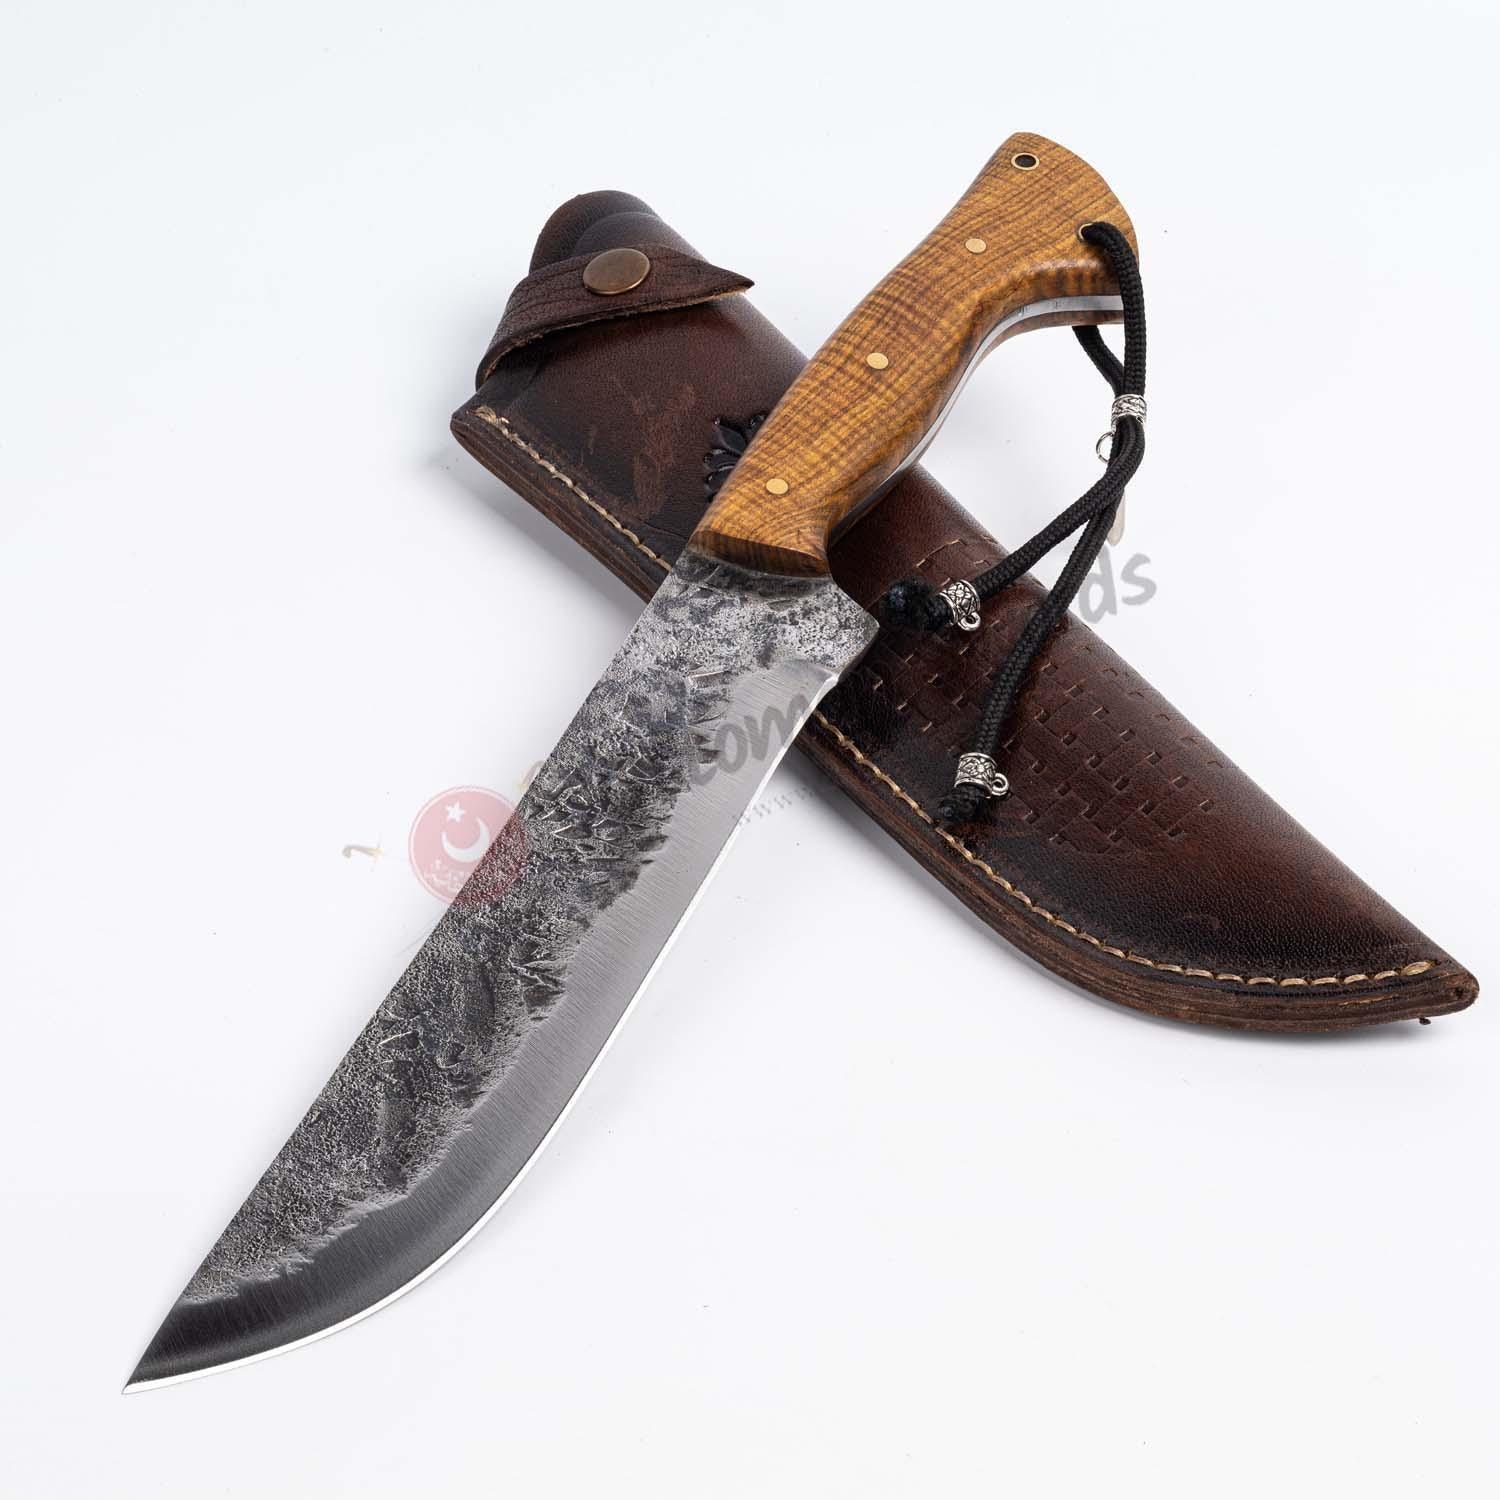 Hand Forged Survival Machete Knives (4)